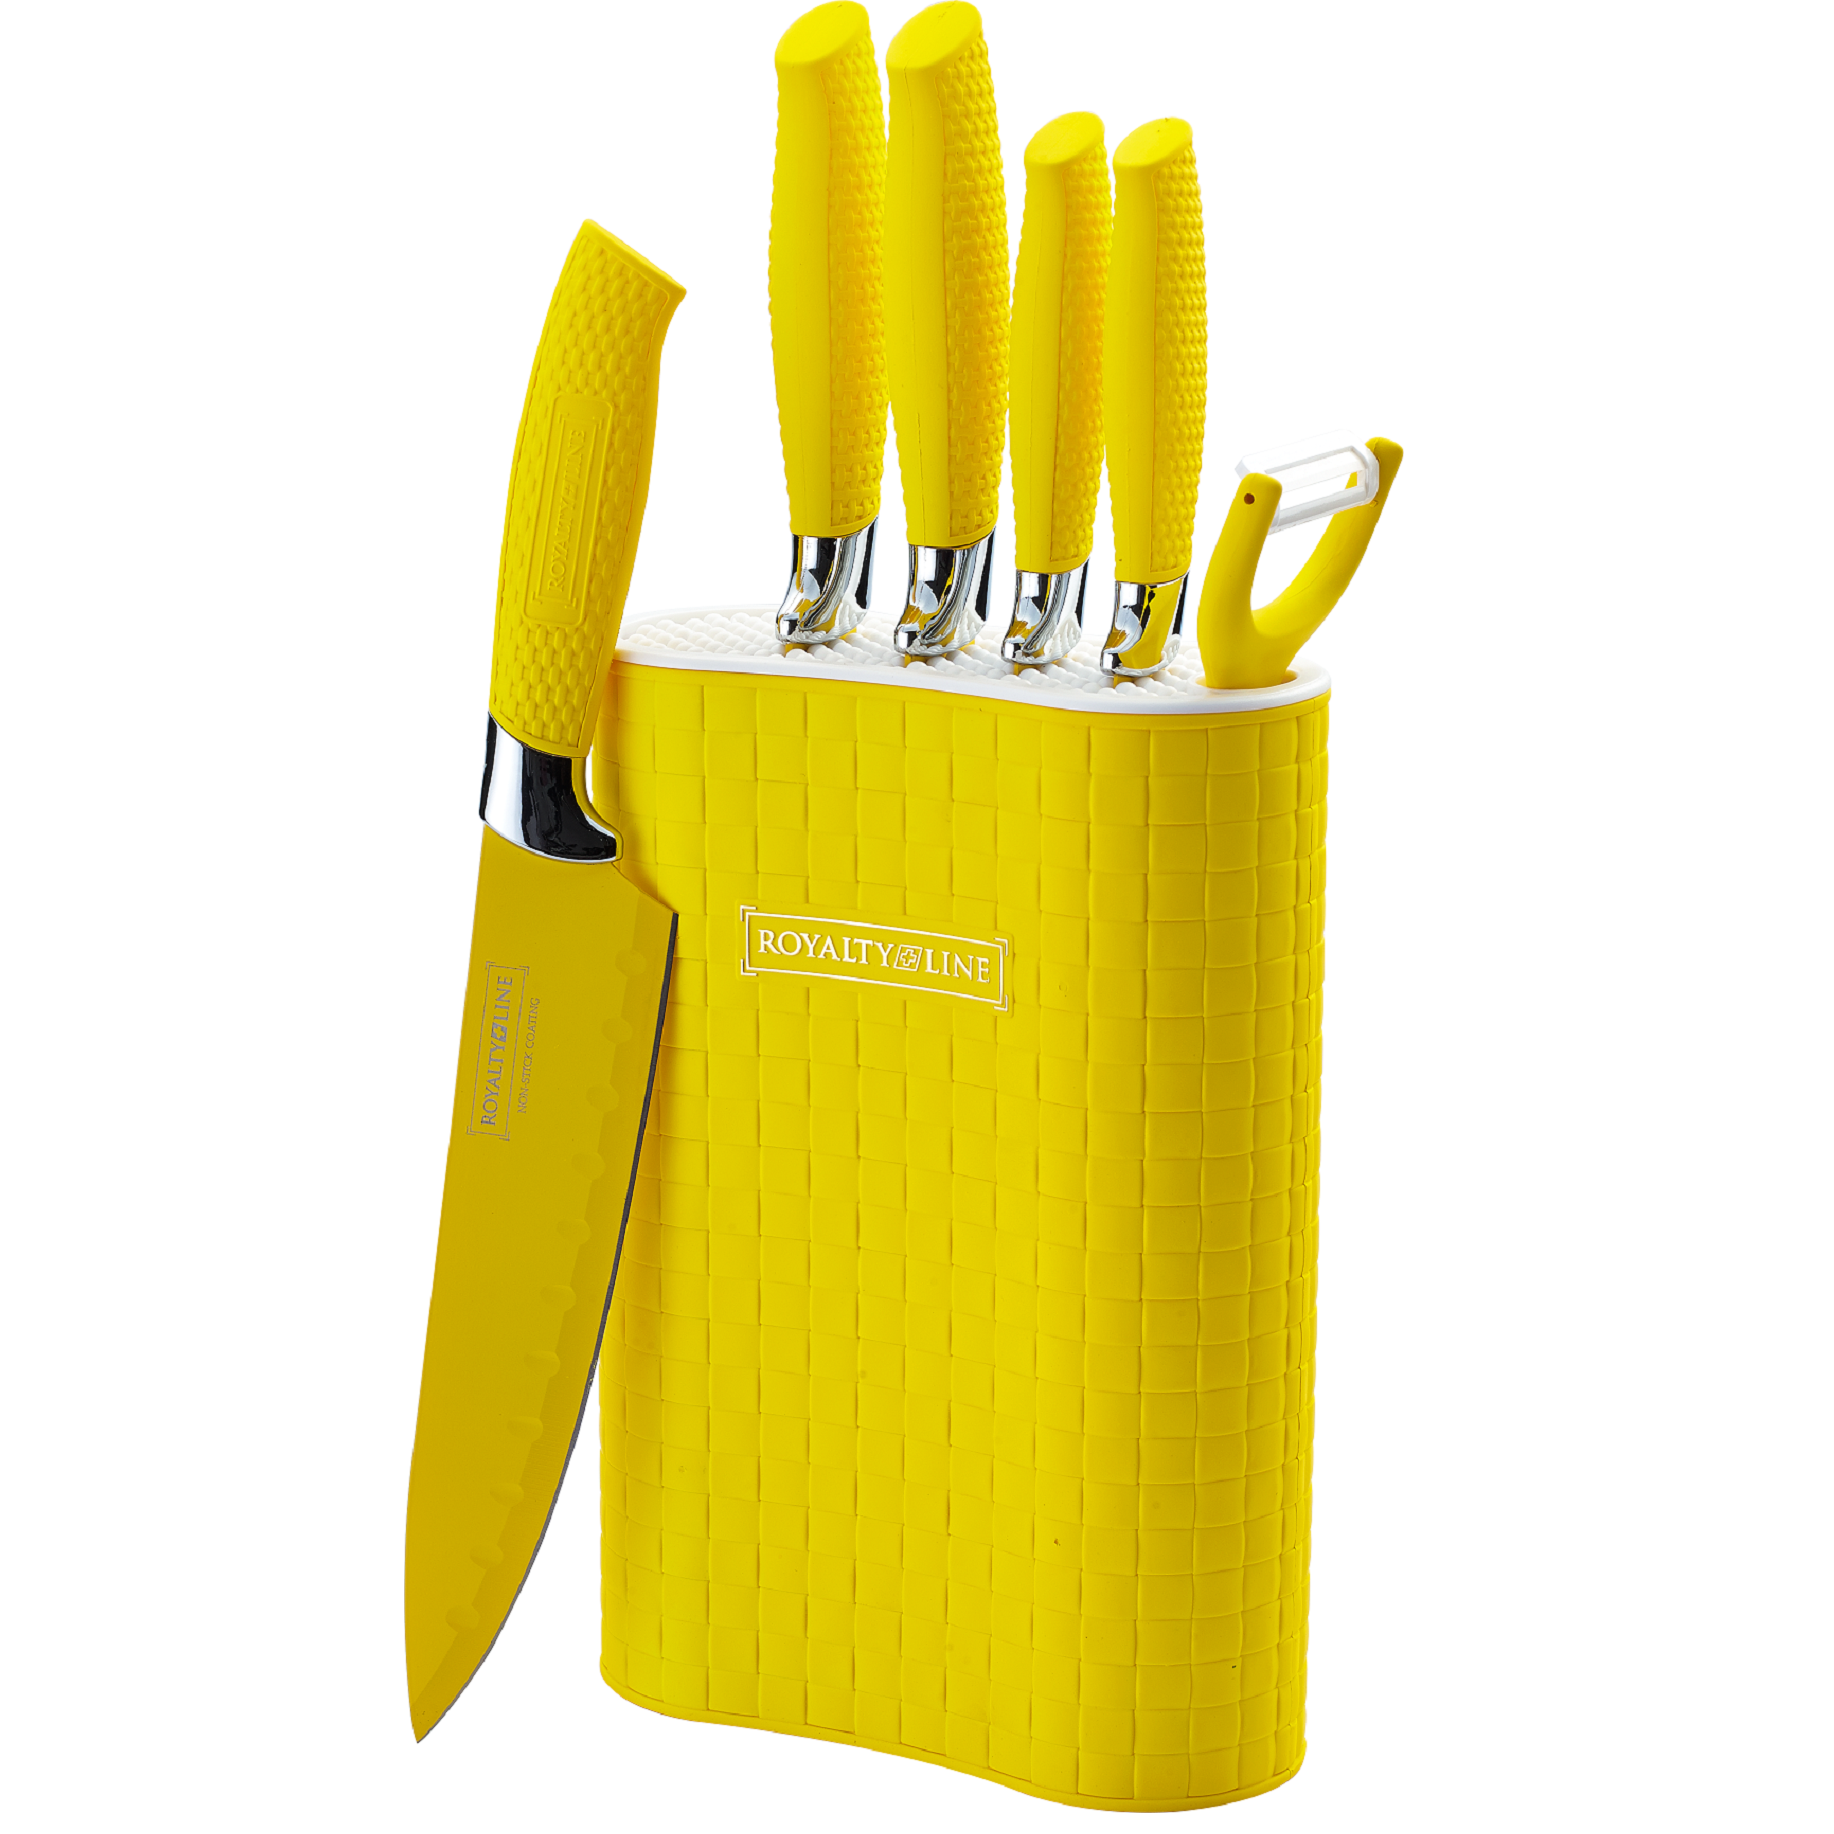 Royalty Line 6 Piece Non-Stick Coating Knife Set Stand Yellow